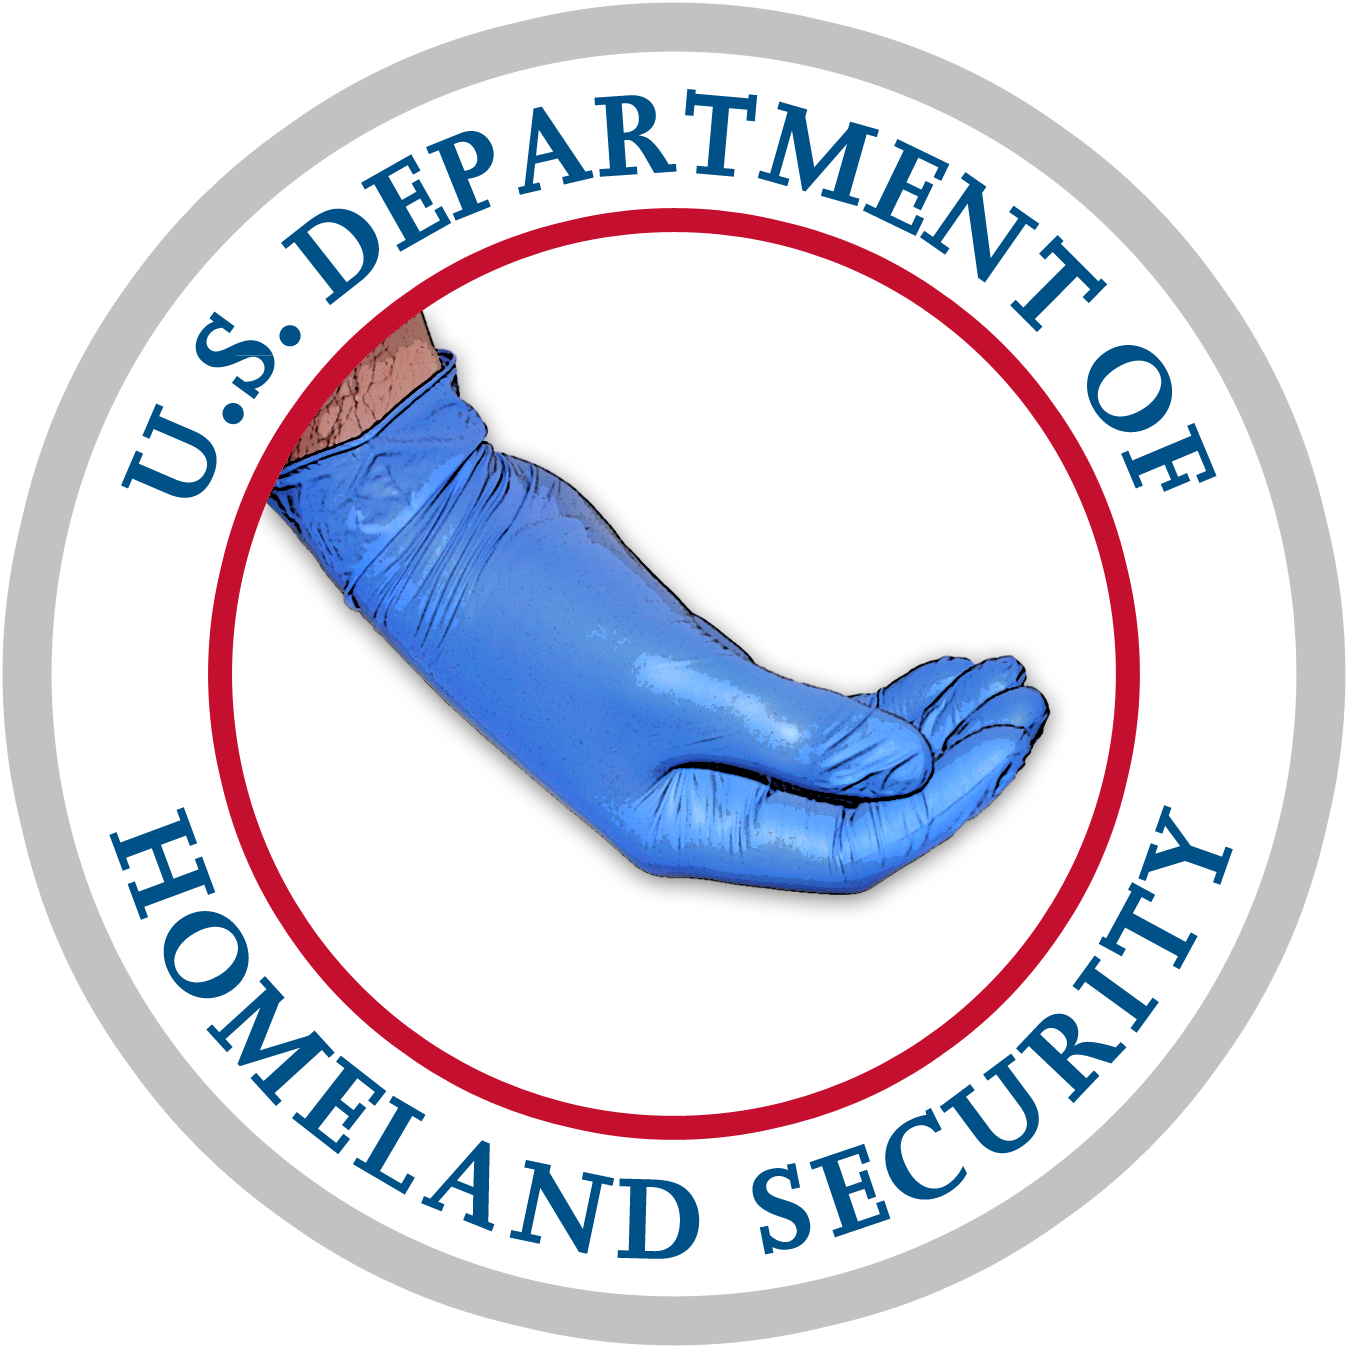 Awesome The Tsa Is Training Employees How To Be More - United States Department Of Homeland Security (1348x1348)